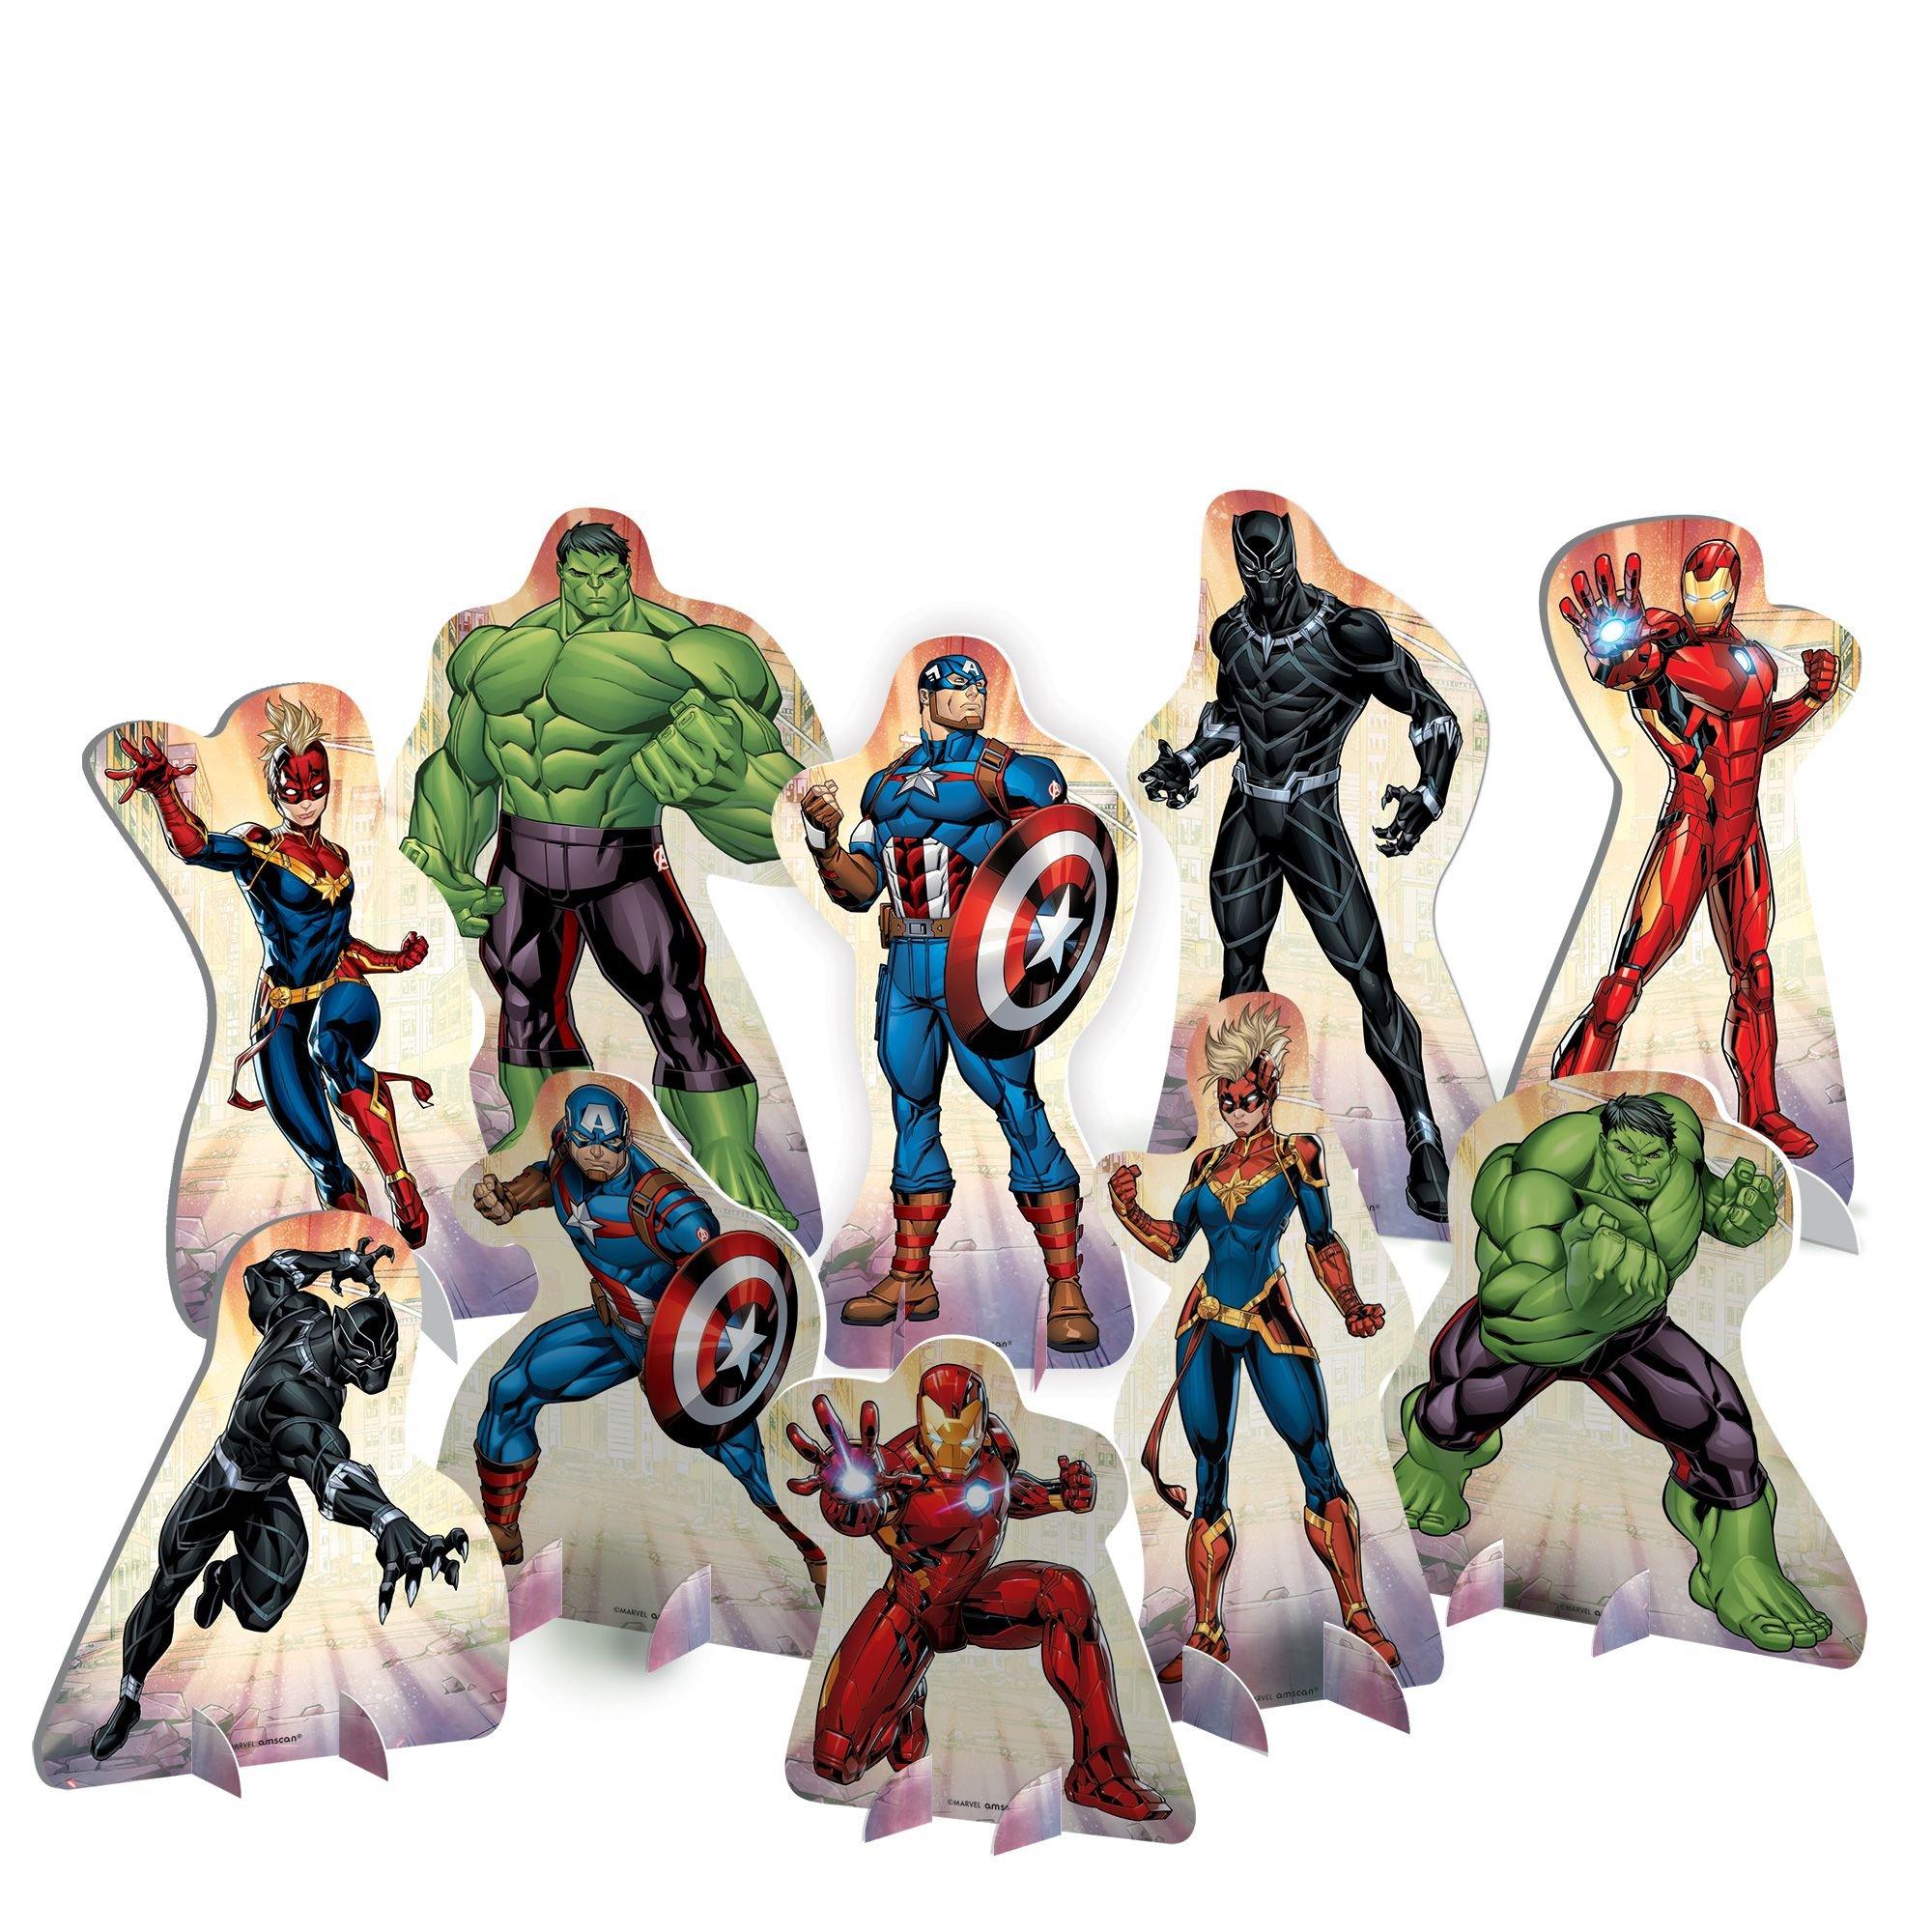 Exquisite Marvel Avengers Powers Unite Table Decoration - 5.16 to 14 Size  Range (1 Pack) - Bold, Colorful & Sturdy Paper Design - Perfect for